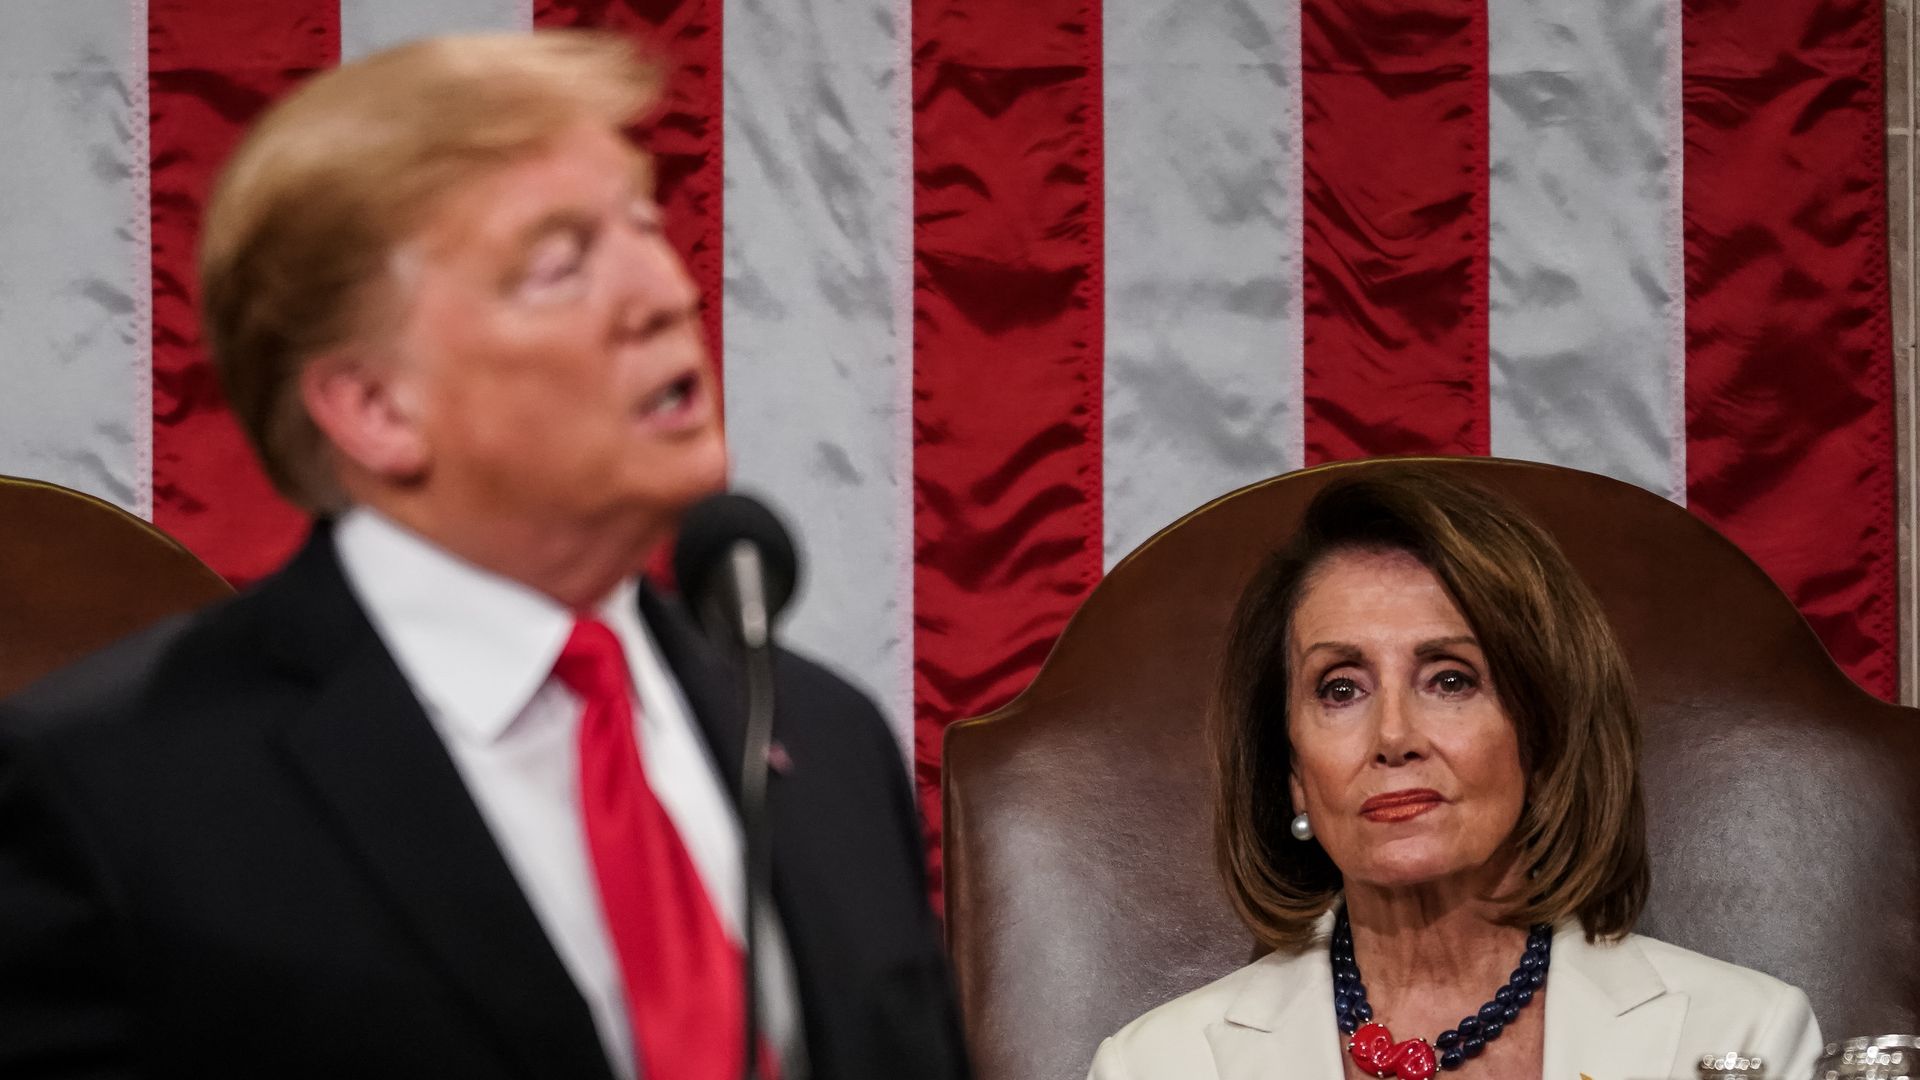 Speaker Nancy Pelosi and Vice President Mike Pence look on as U.S. President Donald Trump delivers the State of the Union address in the chamber of the U.S. House of Representatives 